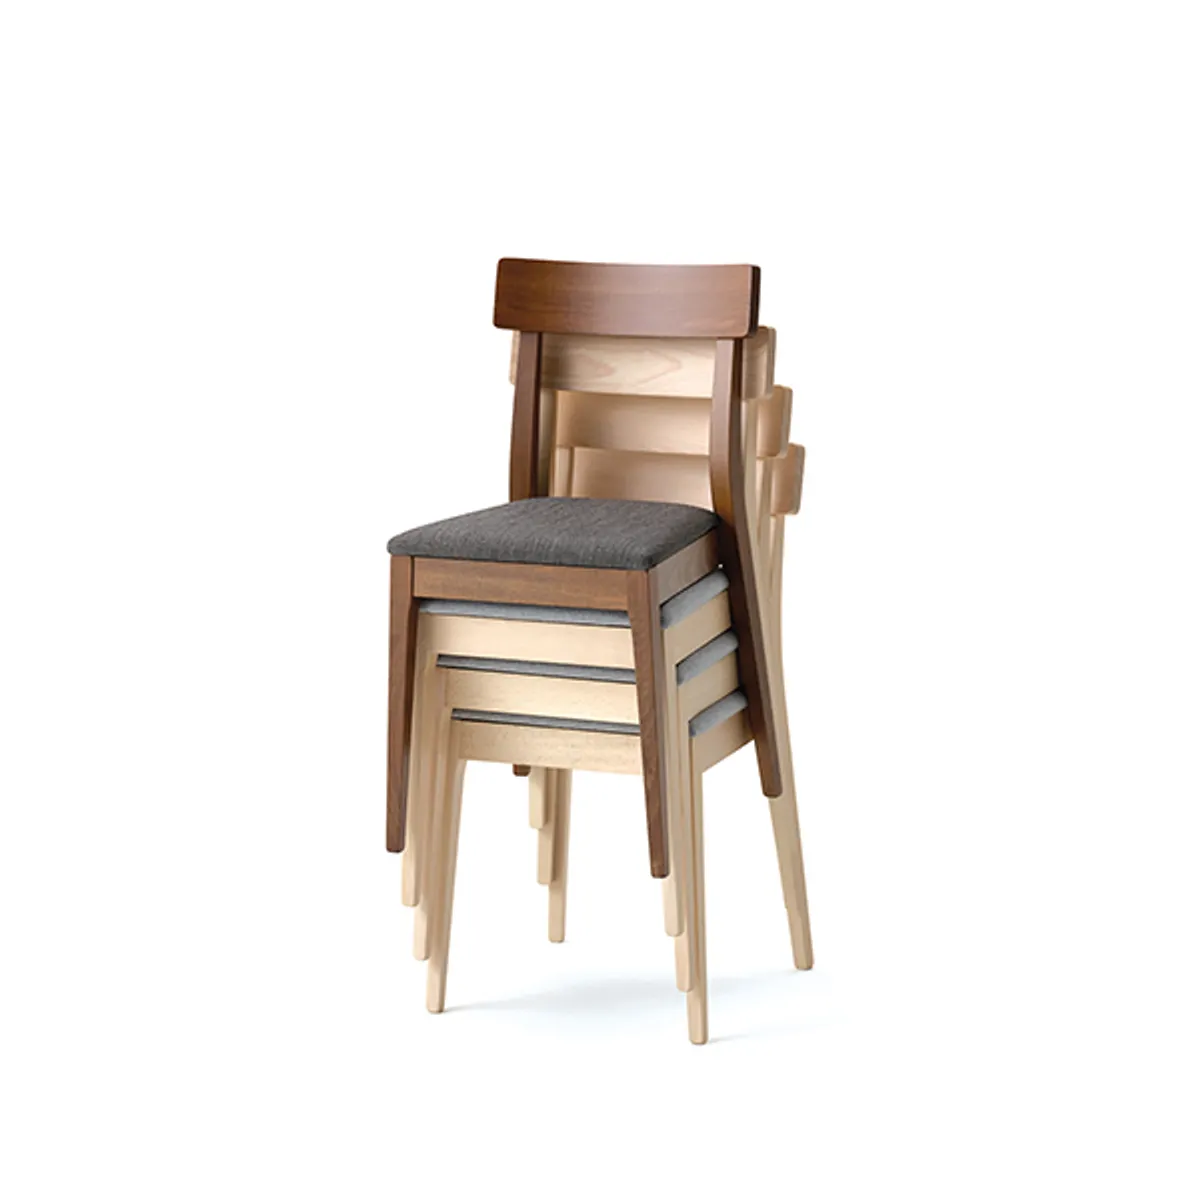 Tupi Stacking Chair Inside Out Contracts